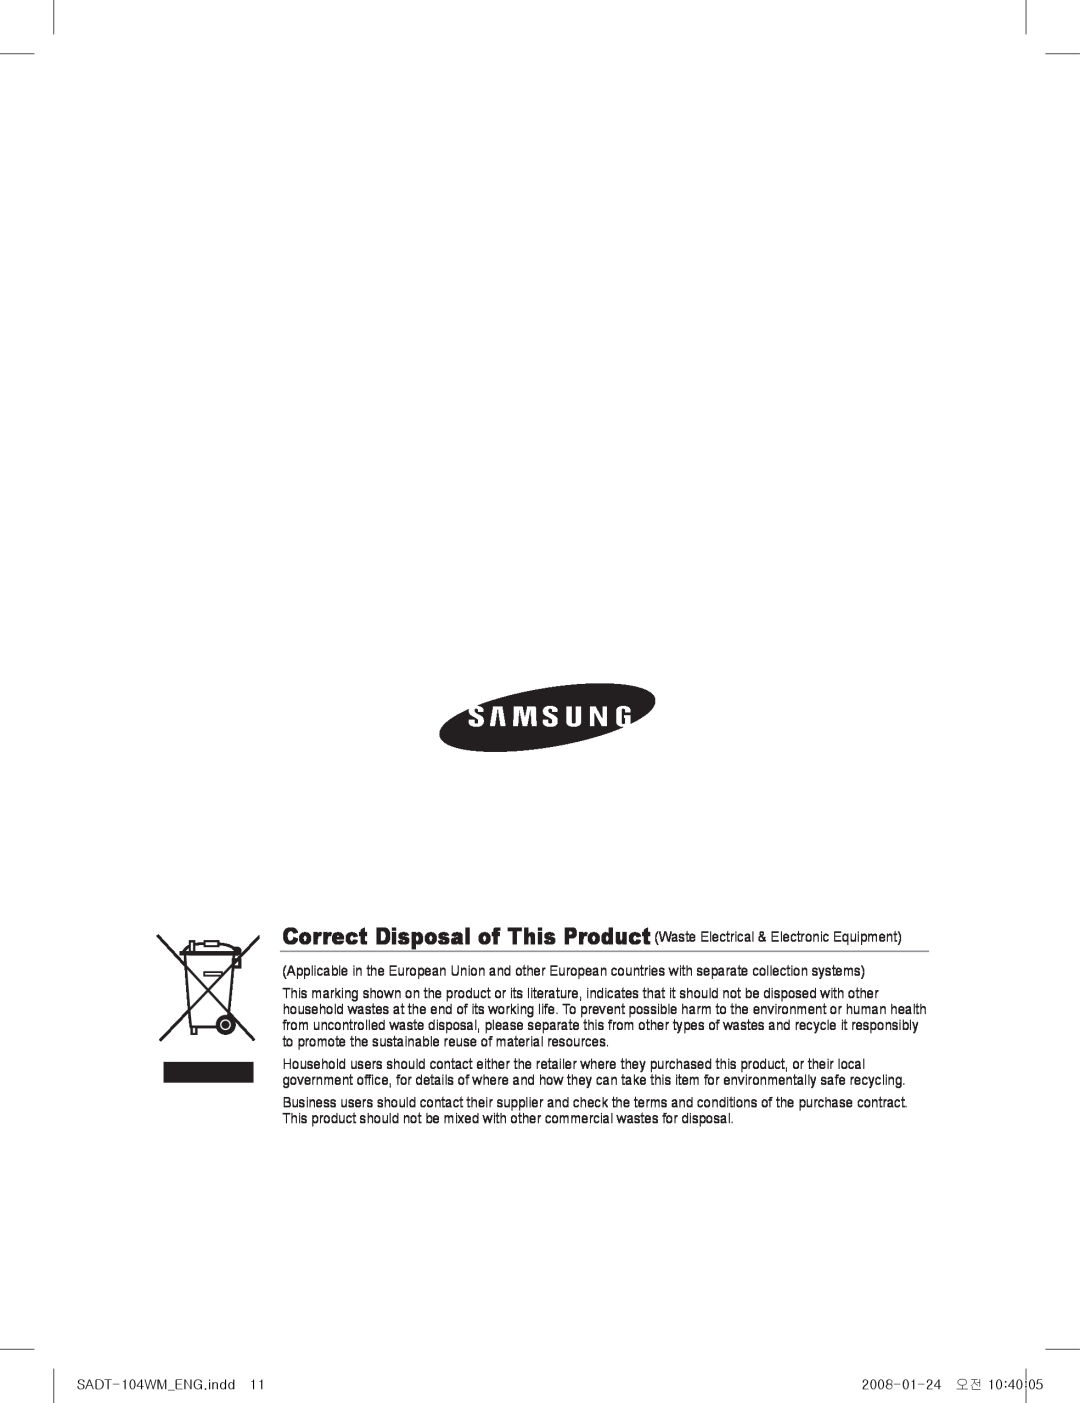 Samsung SADT-104WM manual Correct Disposal of This Product Waste Electrical & Electronic Equipment 